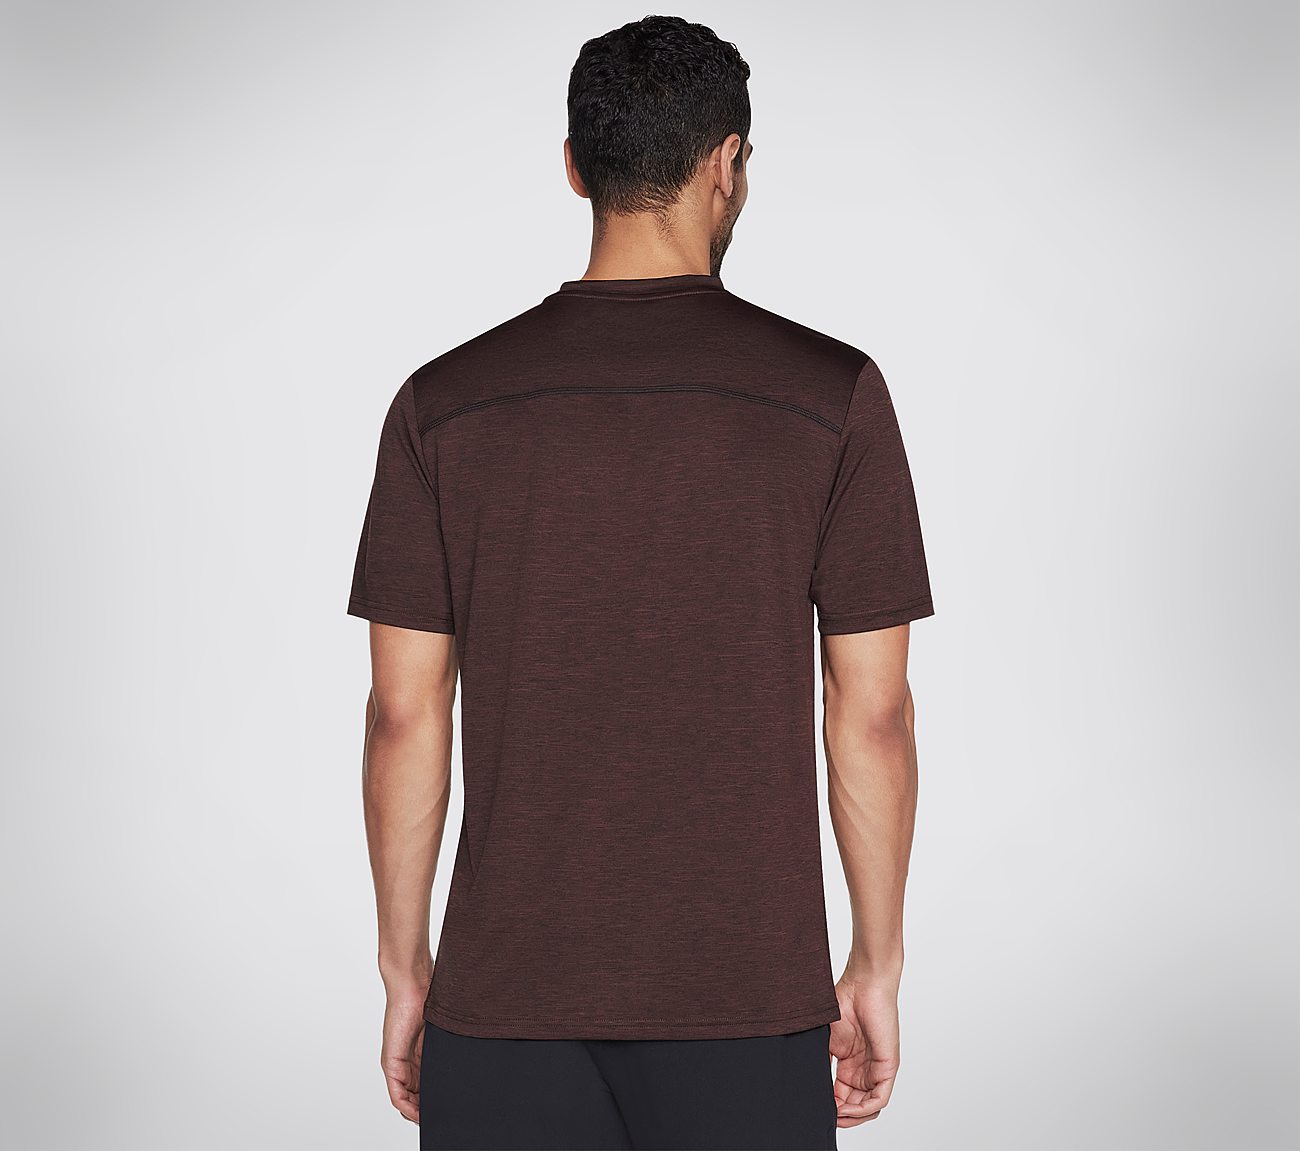  ON THE ROAD TEE, BURGUNDY Apparel Top View